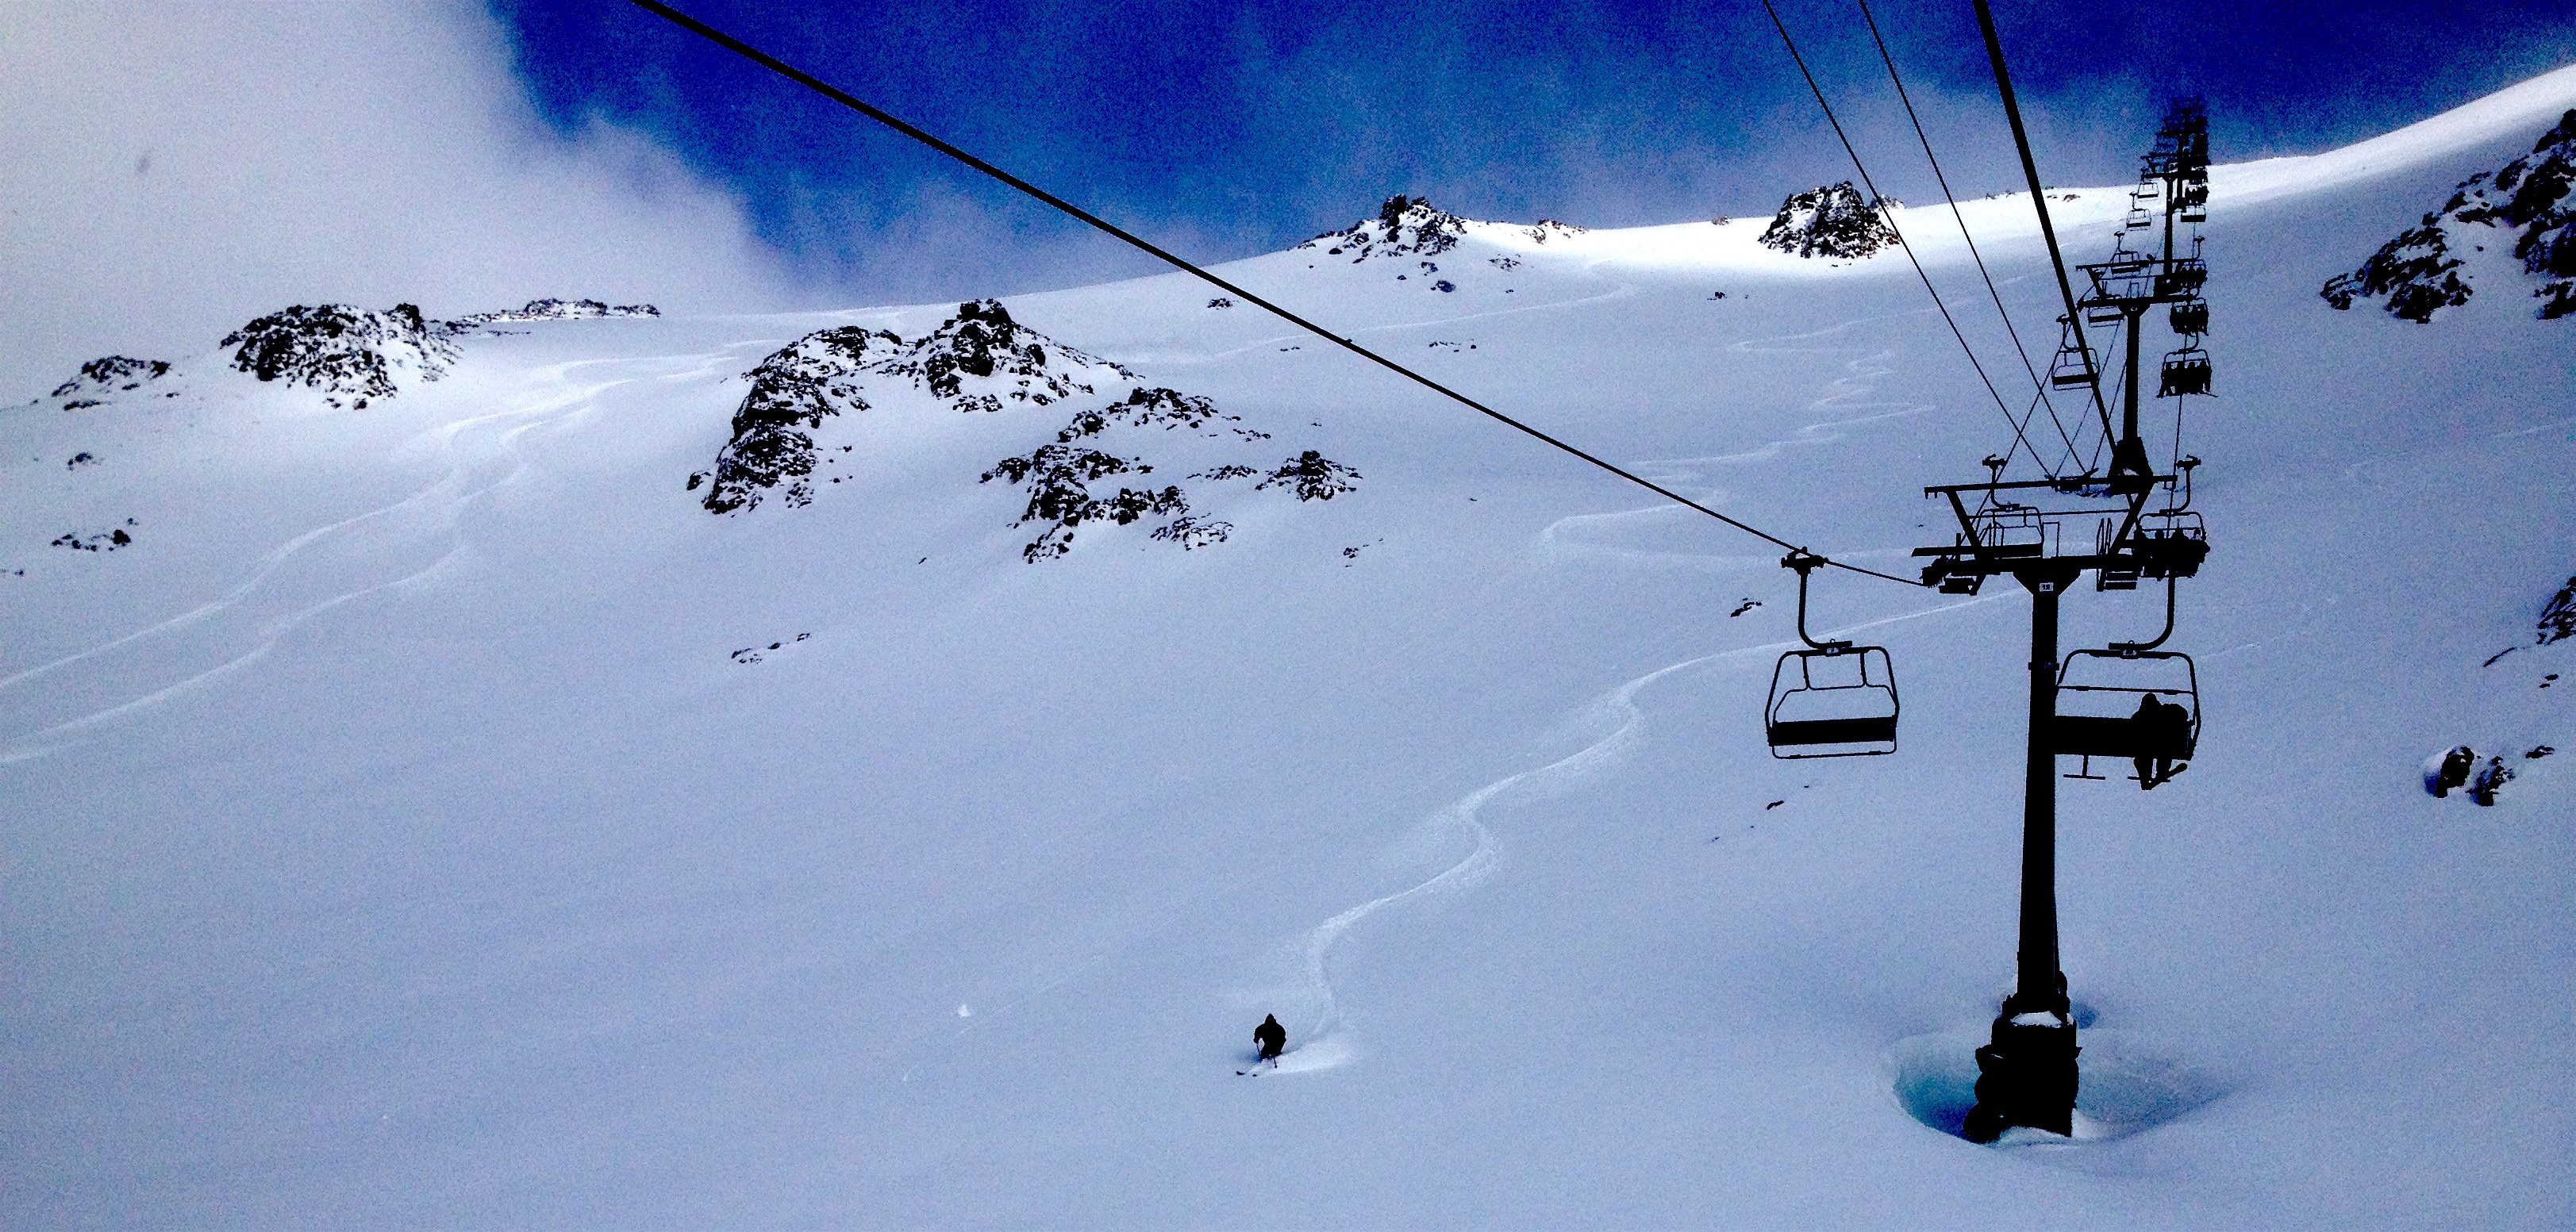 First tracks in Nubes today... Yum. photo: snowbrains